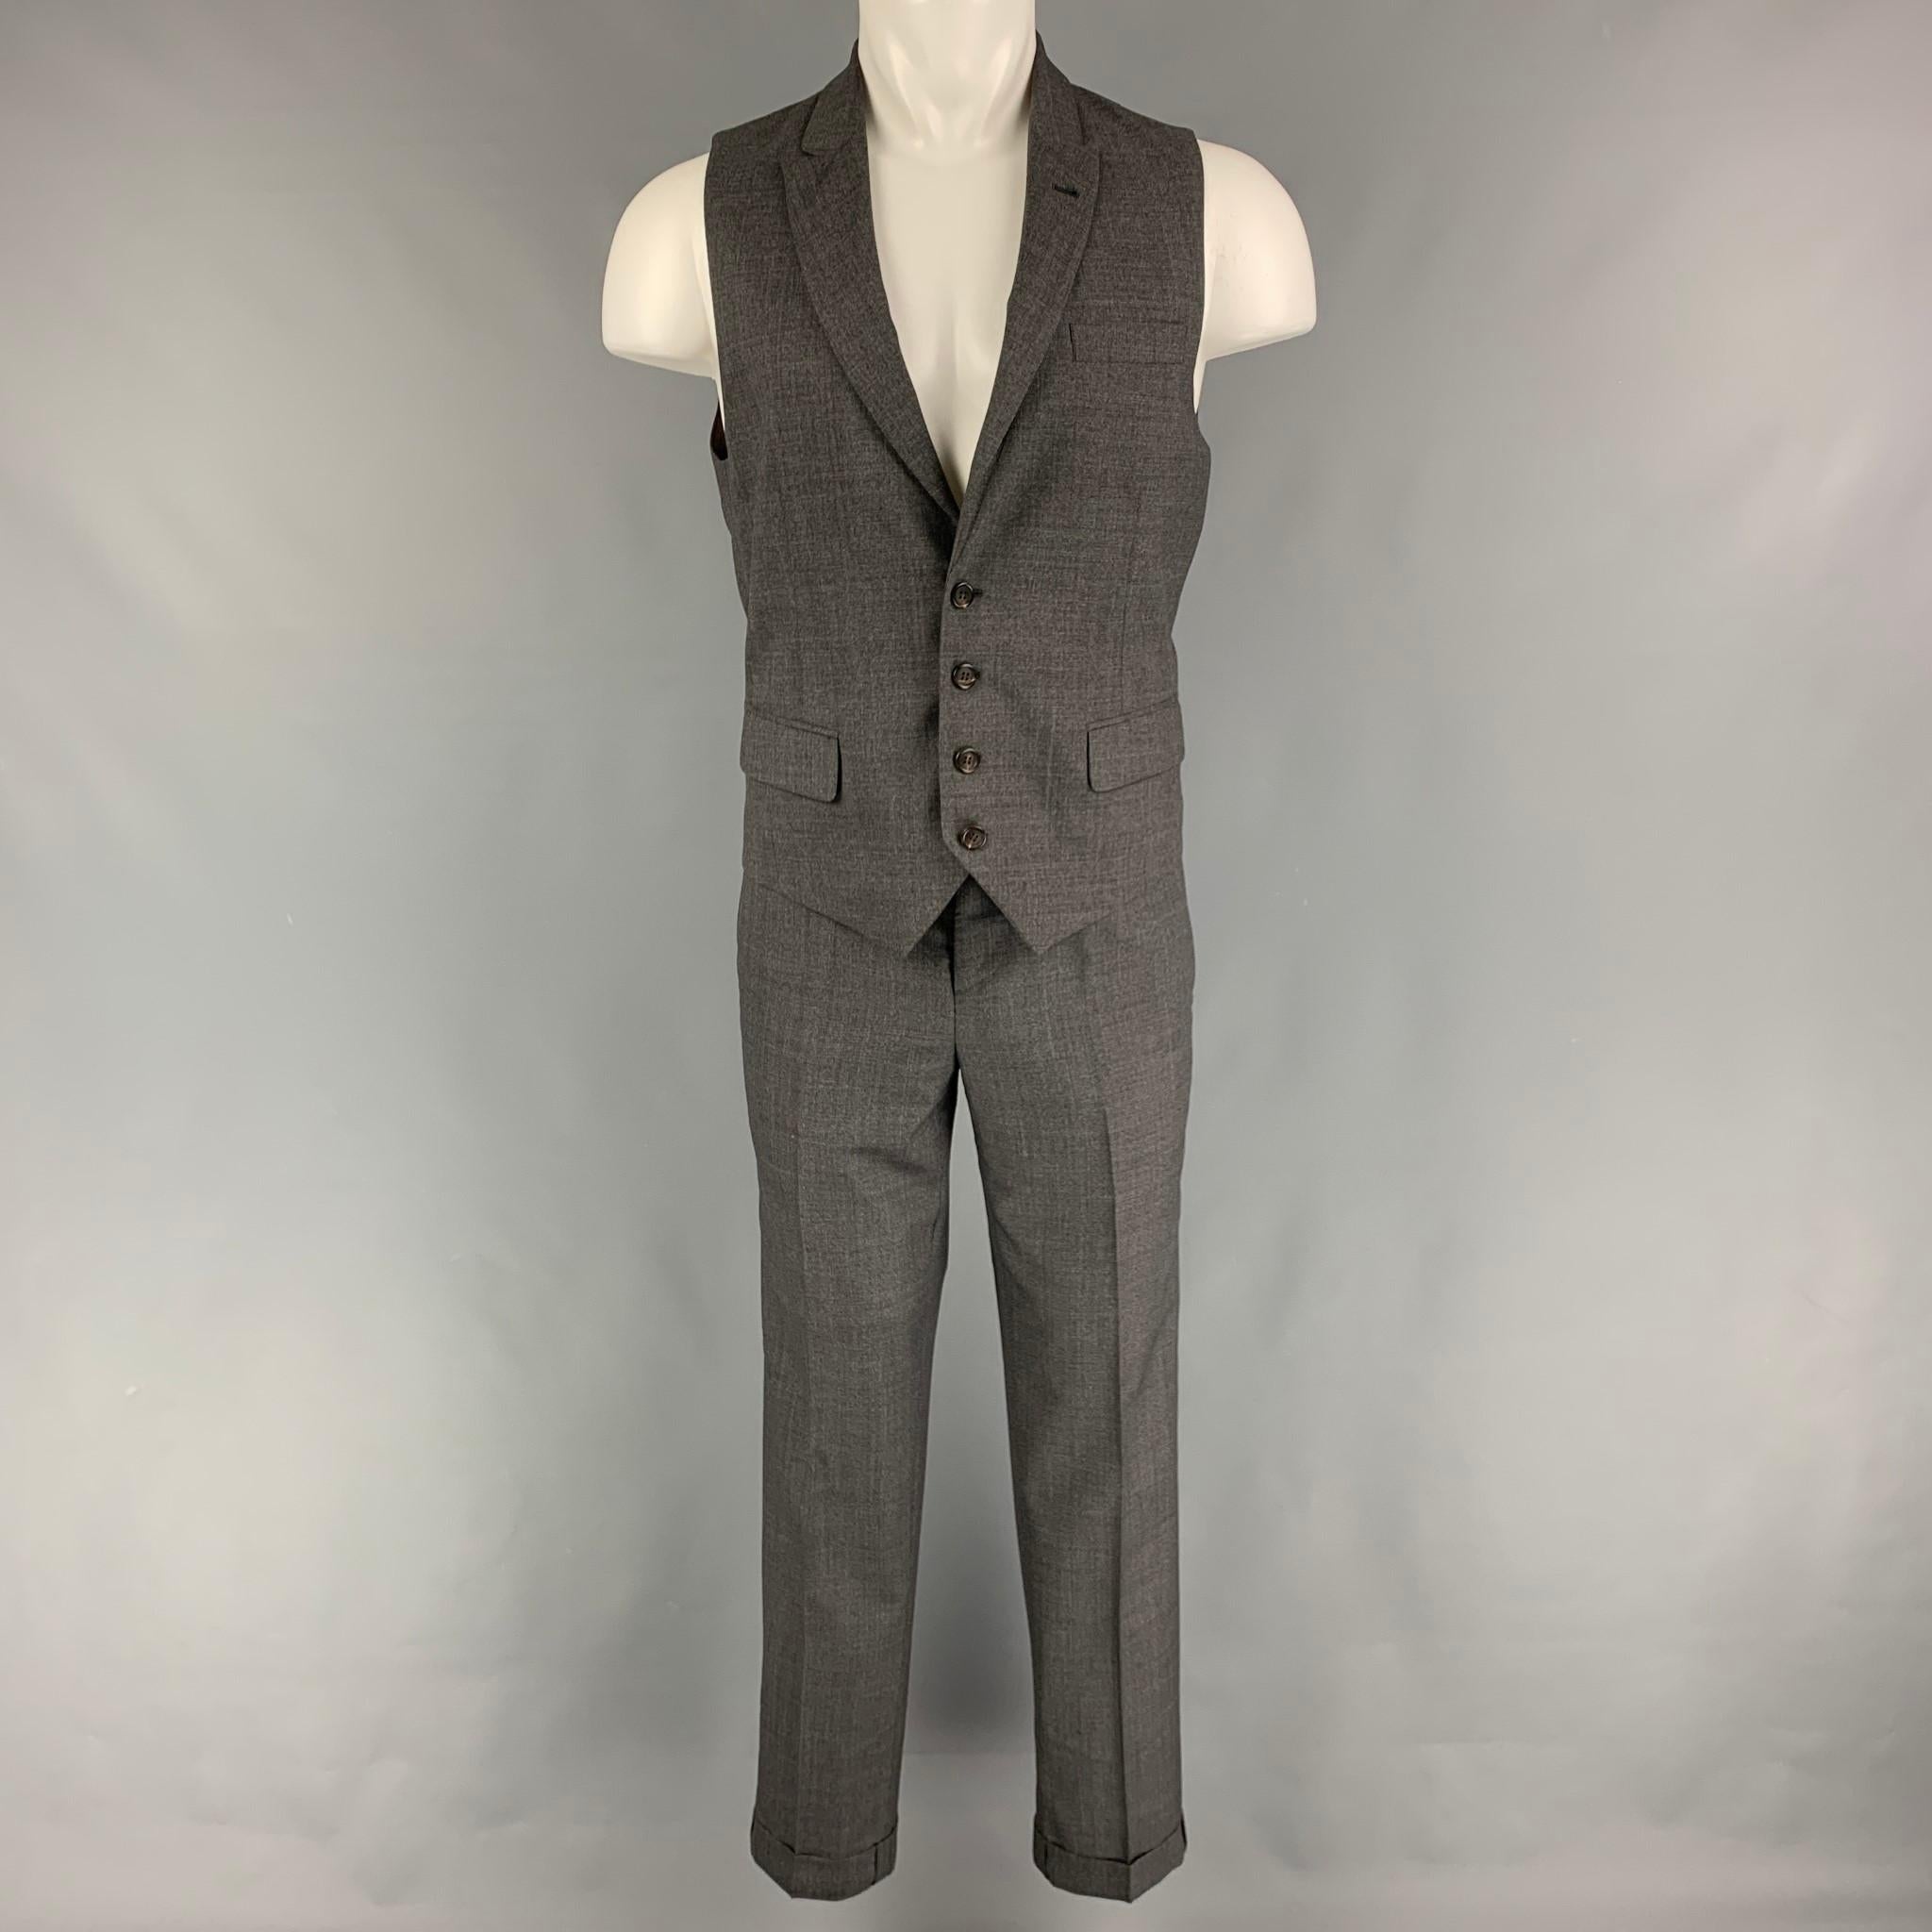 BRUNELLO CUCINELLI vest suit comes in a grey wool and includes a single breasted, four button dress vest with a peak lapel and matching flat front trousers. Made in Italy.

Very Good Pre-Owned Condition.
Marked: Pants /